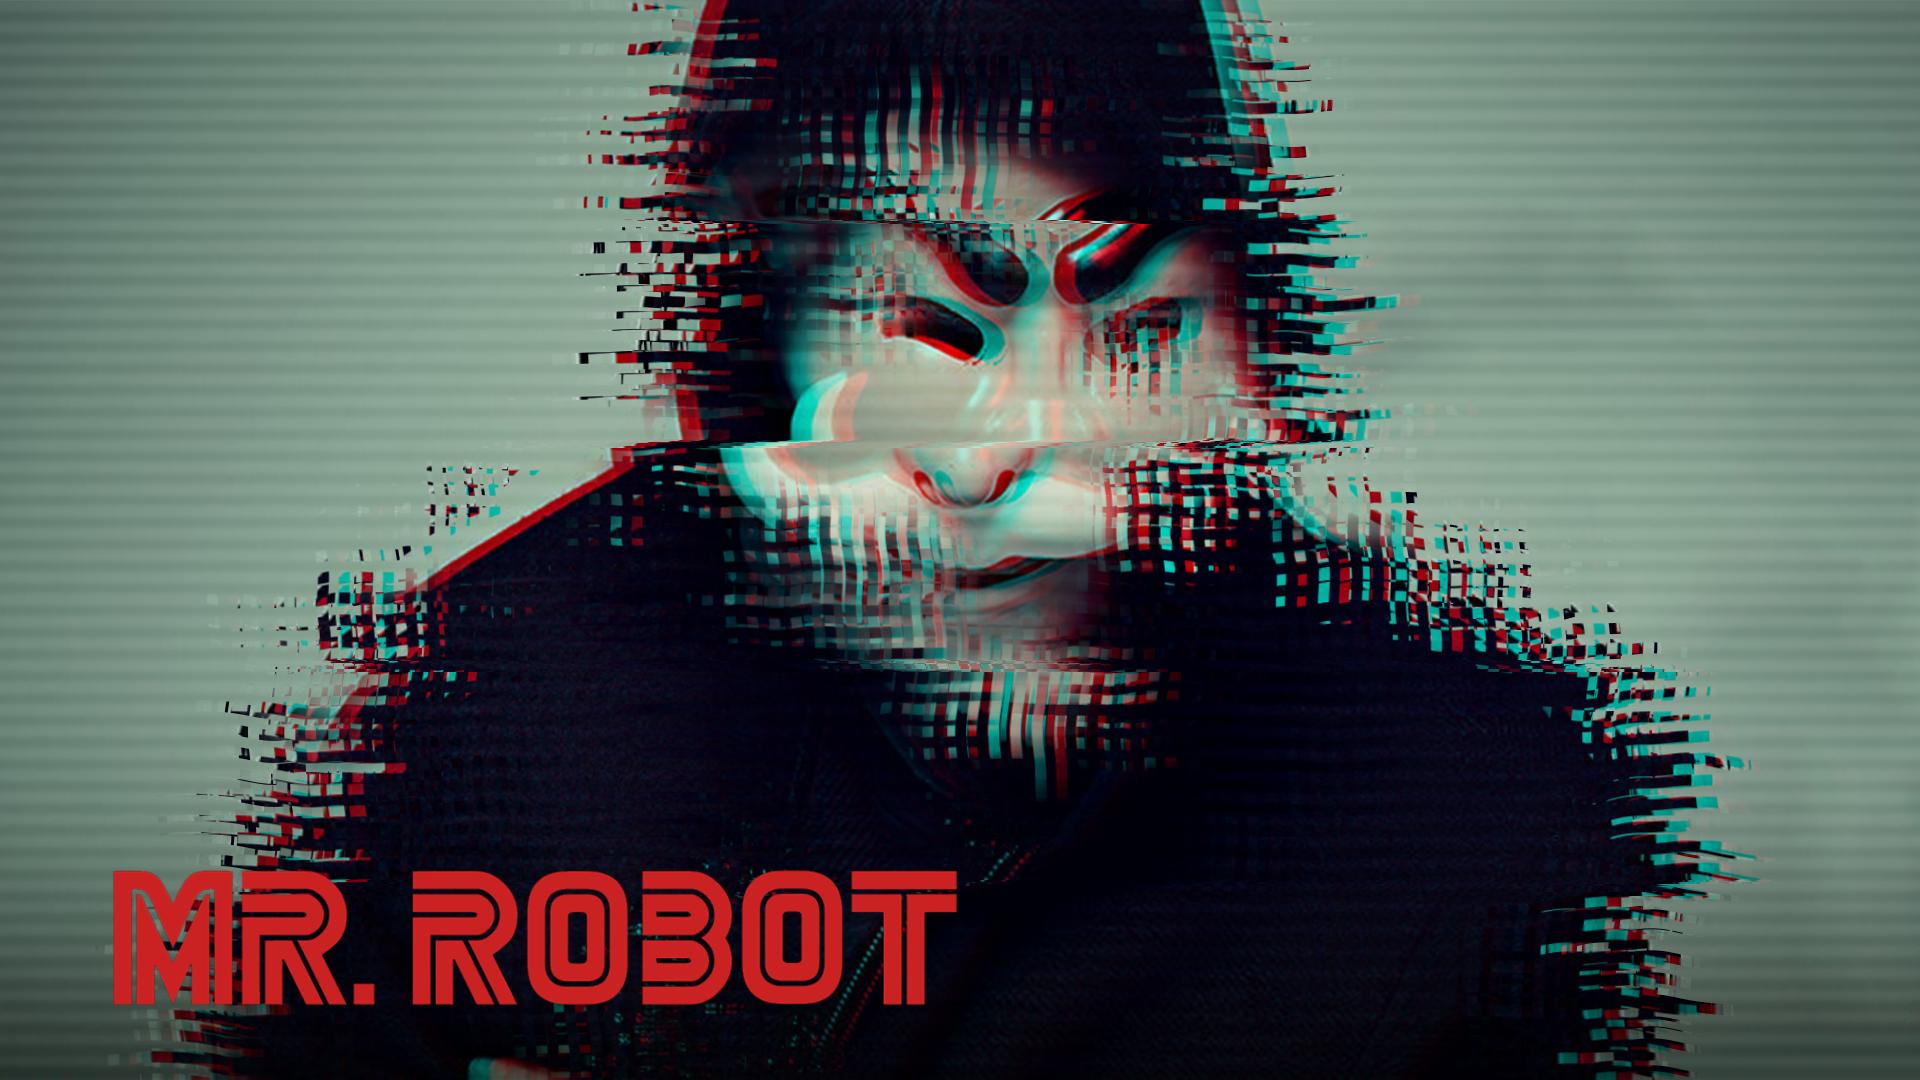 Mr. Robot Wallpapers and Backgrounds Image